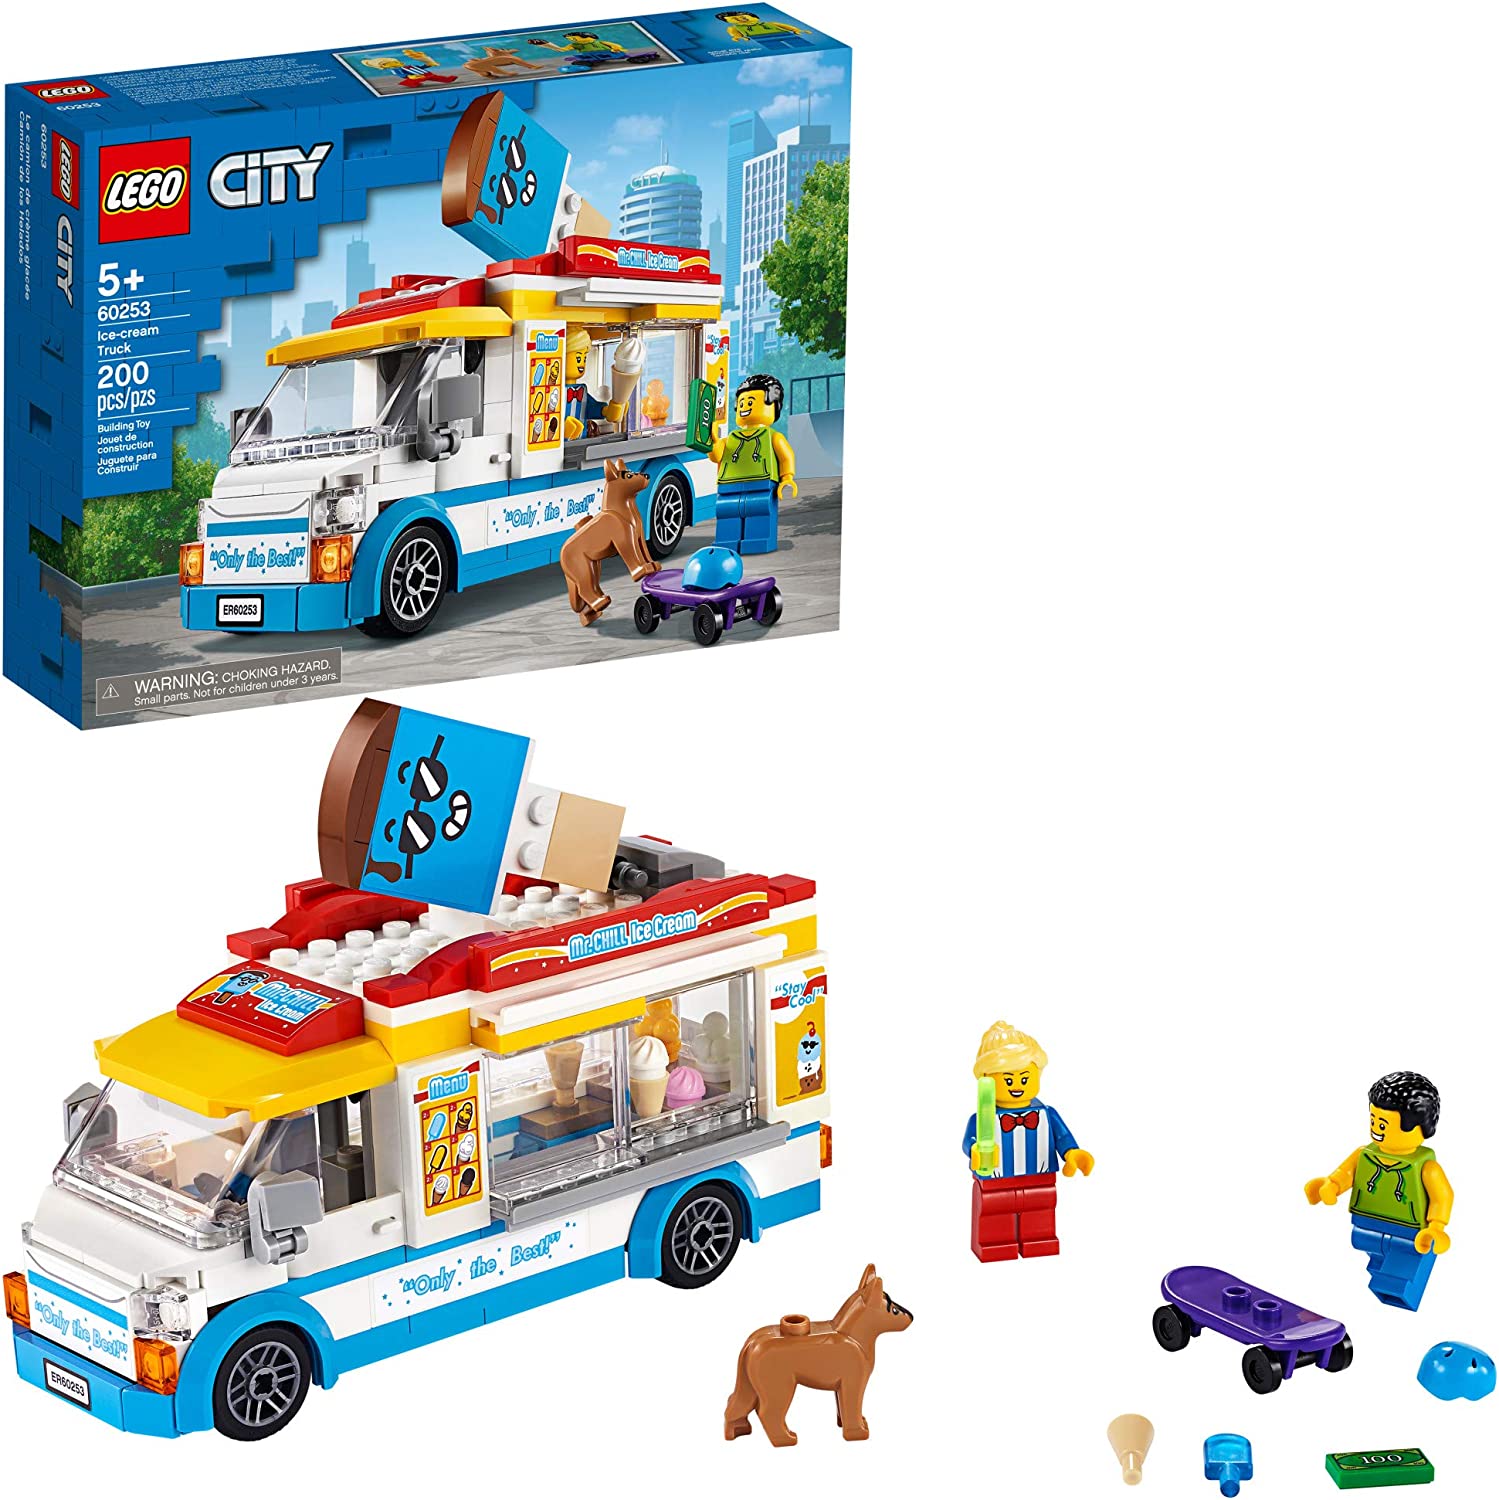 LEGO City Truck 60253, Cool Building Set for Kids, New 2020 (200 Pieces) - Oman Motor Homes